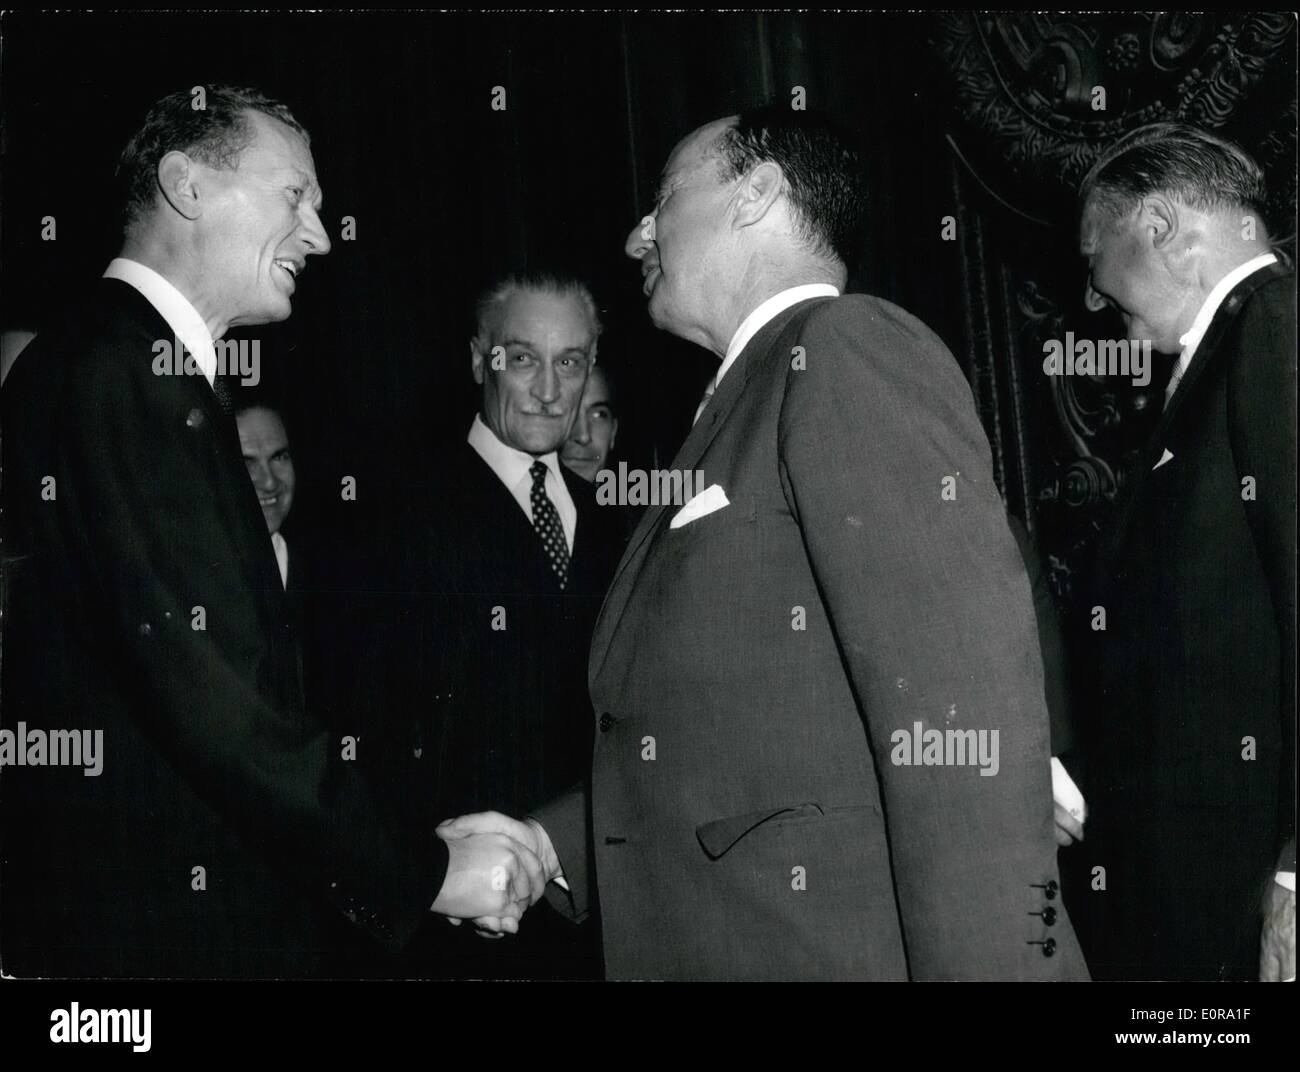 Sep. 09, 1958 - Adlai Stevenson at Quai D'Orsay Photo Shows Adlai Stevenson shakes hands with M. Couve De Murville, french Foreign Minister, as he was received at the Quai D'Orasy this afternoon. Stock Photo